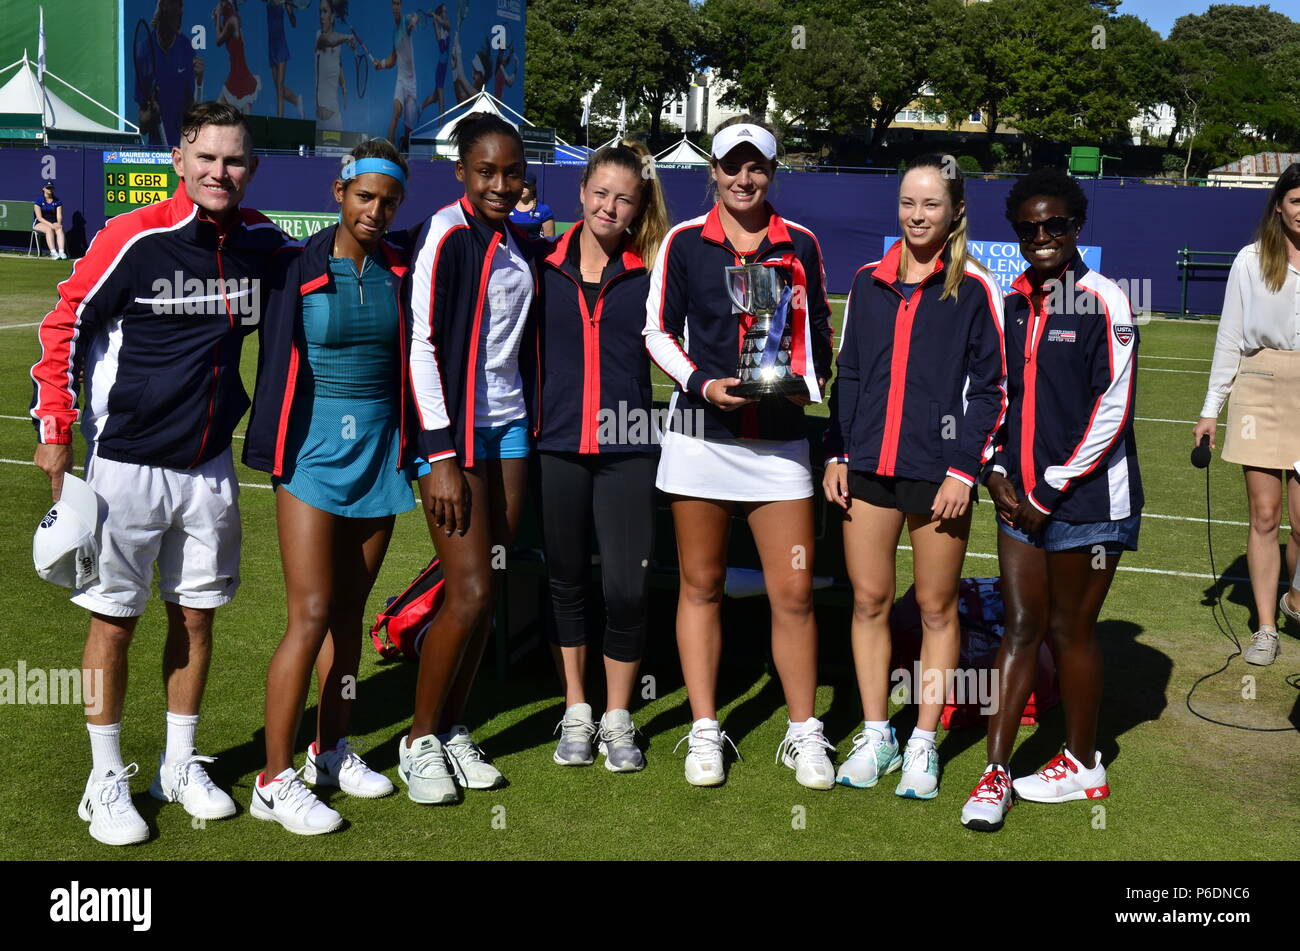 29th June, Eastbourne, UK. USA team win the Maureen Connolly Challenge Trophy. International junior competition between the USA and GB teams. Credit: PjrFoto/Alamy Live News Stock Photo